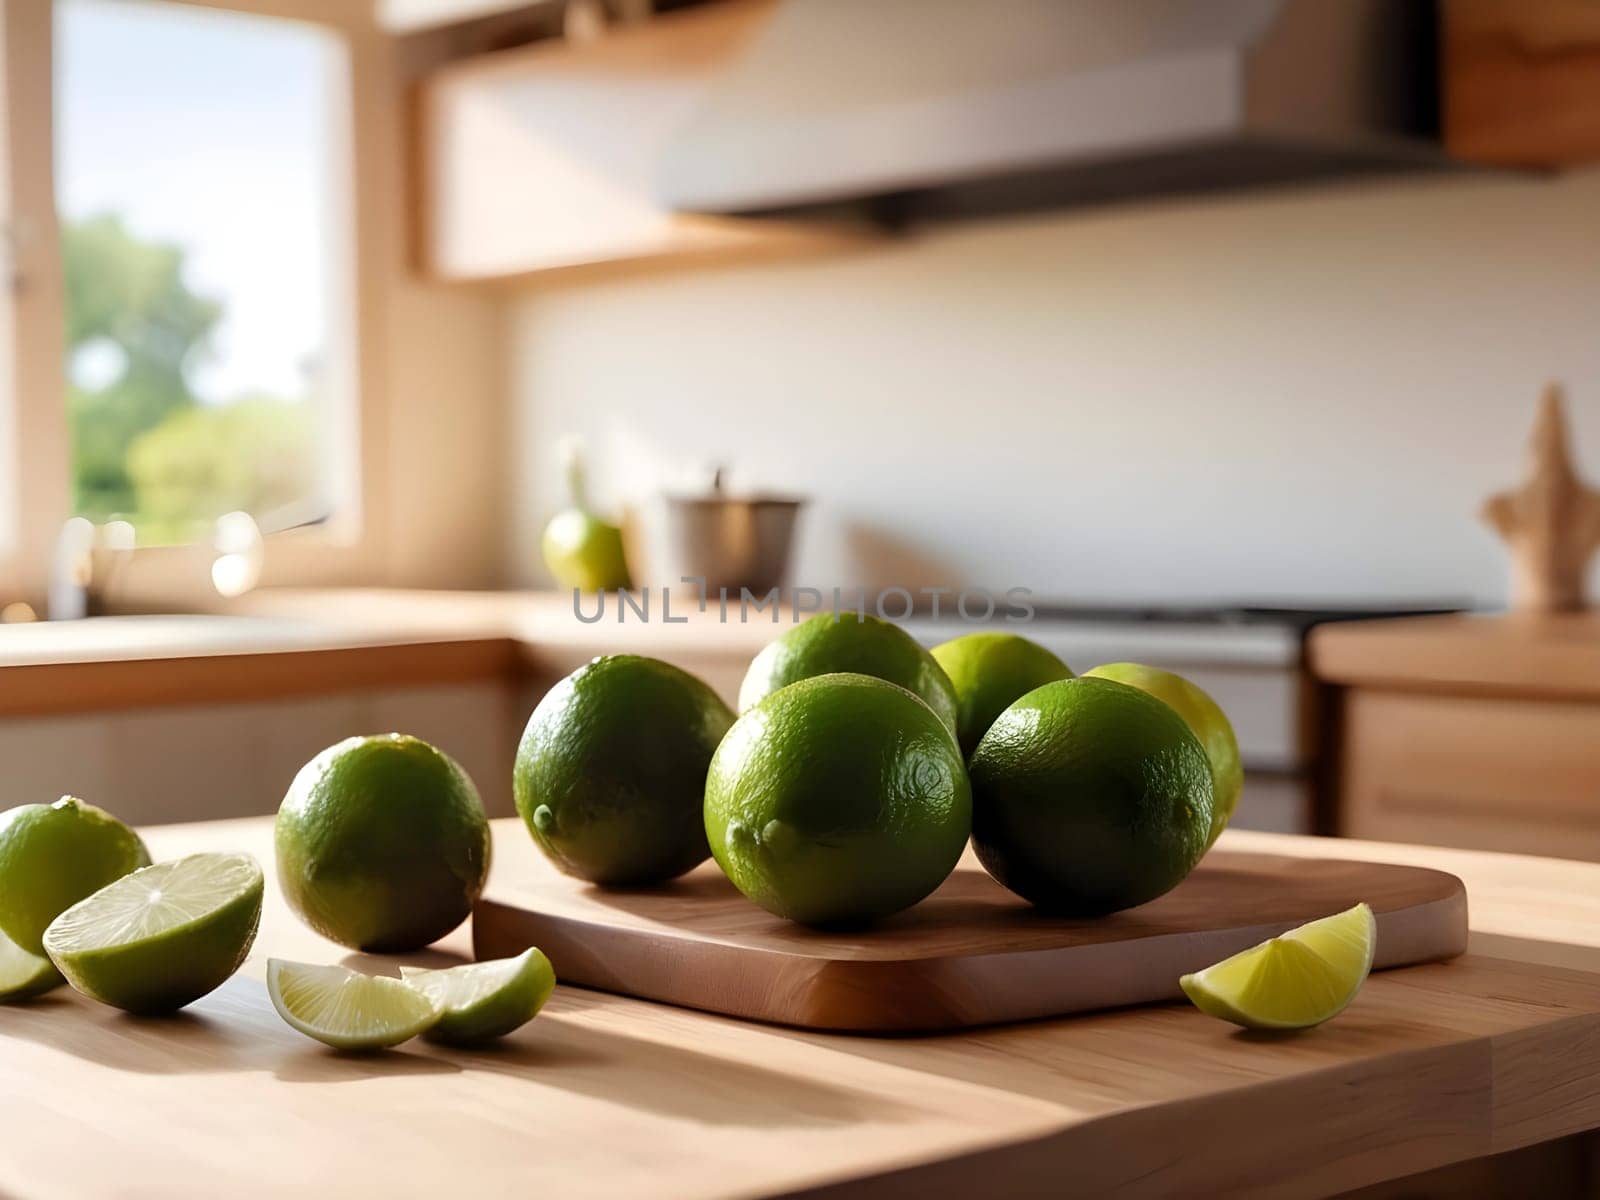 Kitchen Elegance: Limes on Wooden Surface Illuminated by Warm Afternoon Sun.